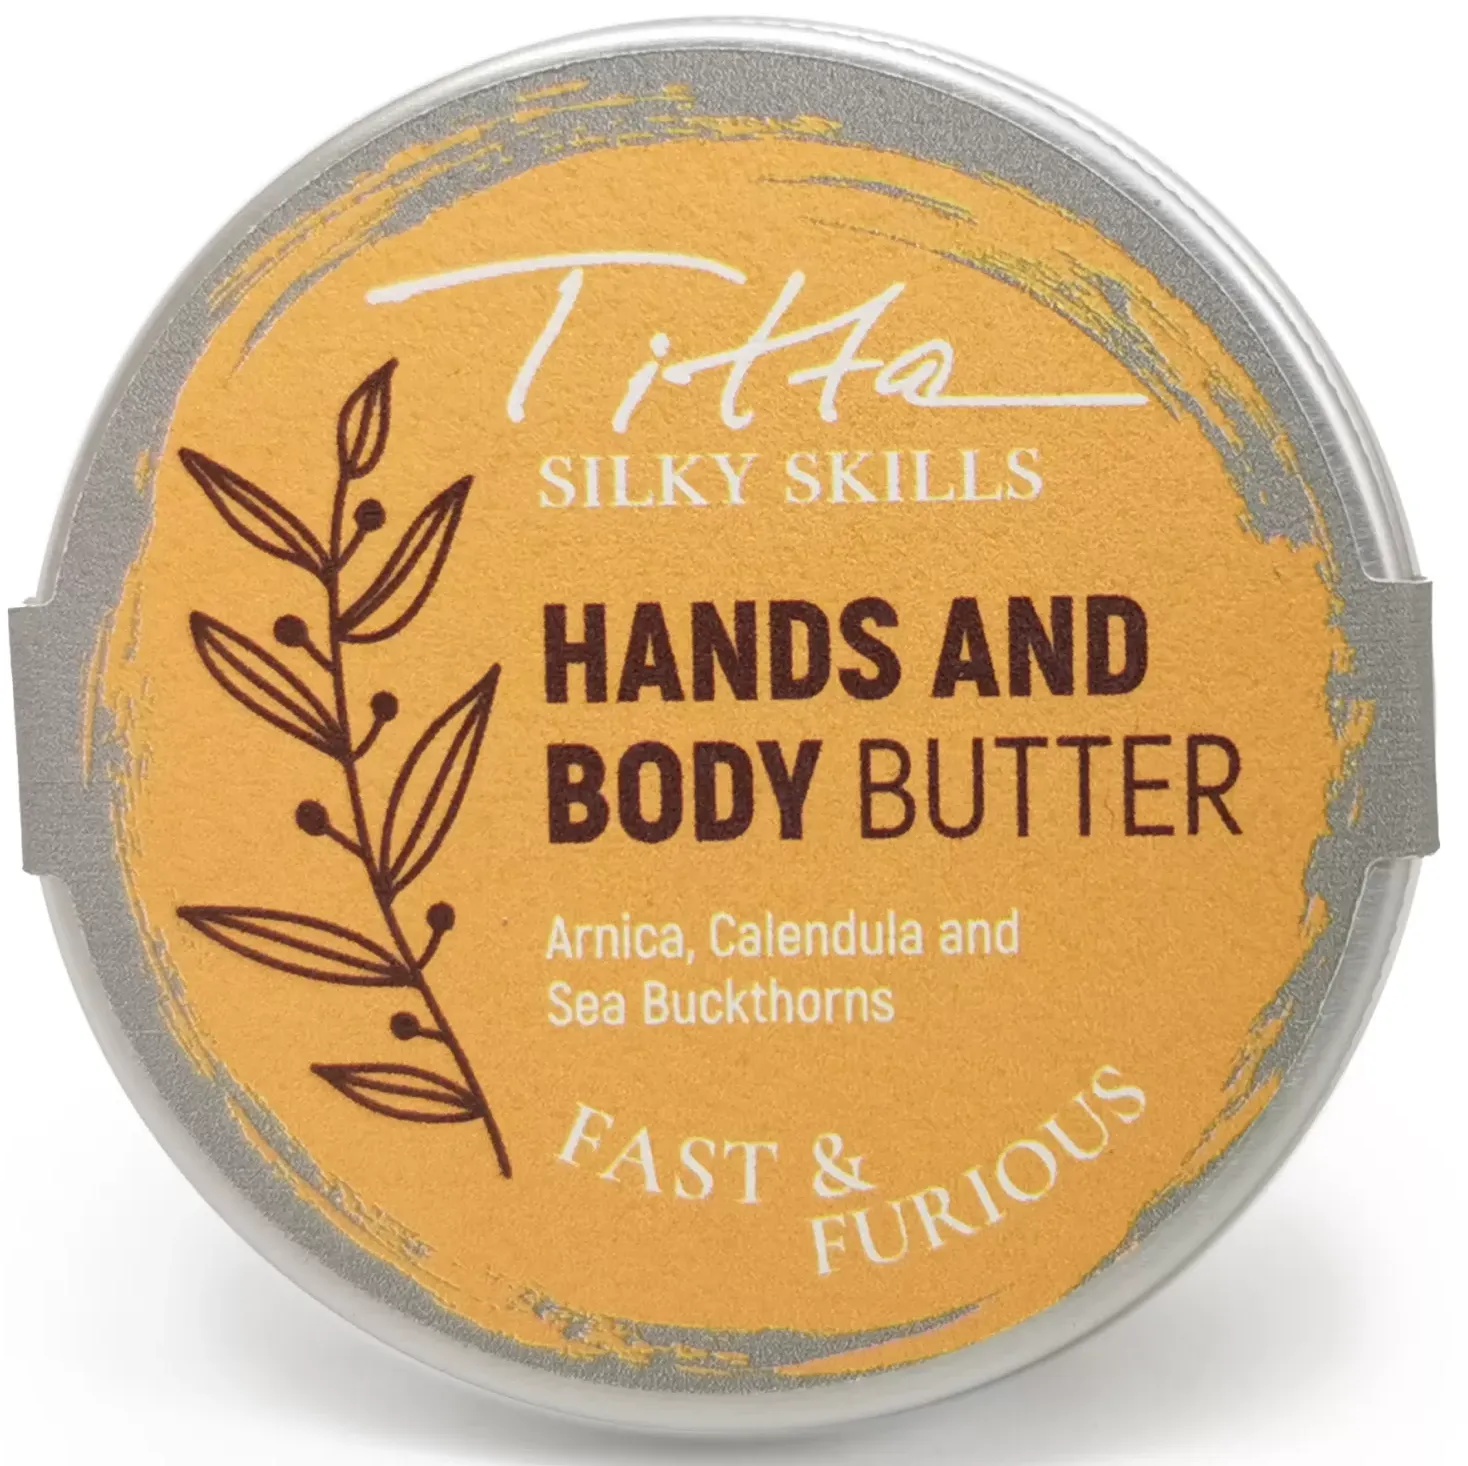 Titta Silky Skills Fast And Furious Hands And Body Butter